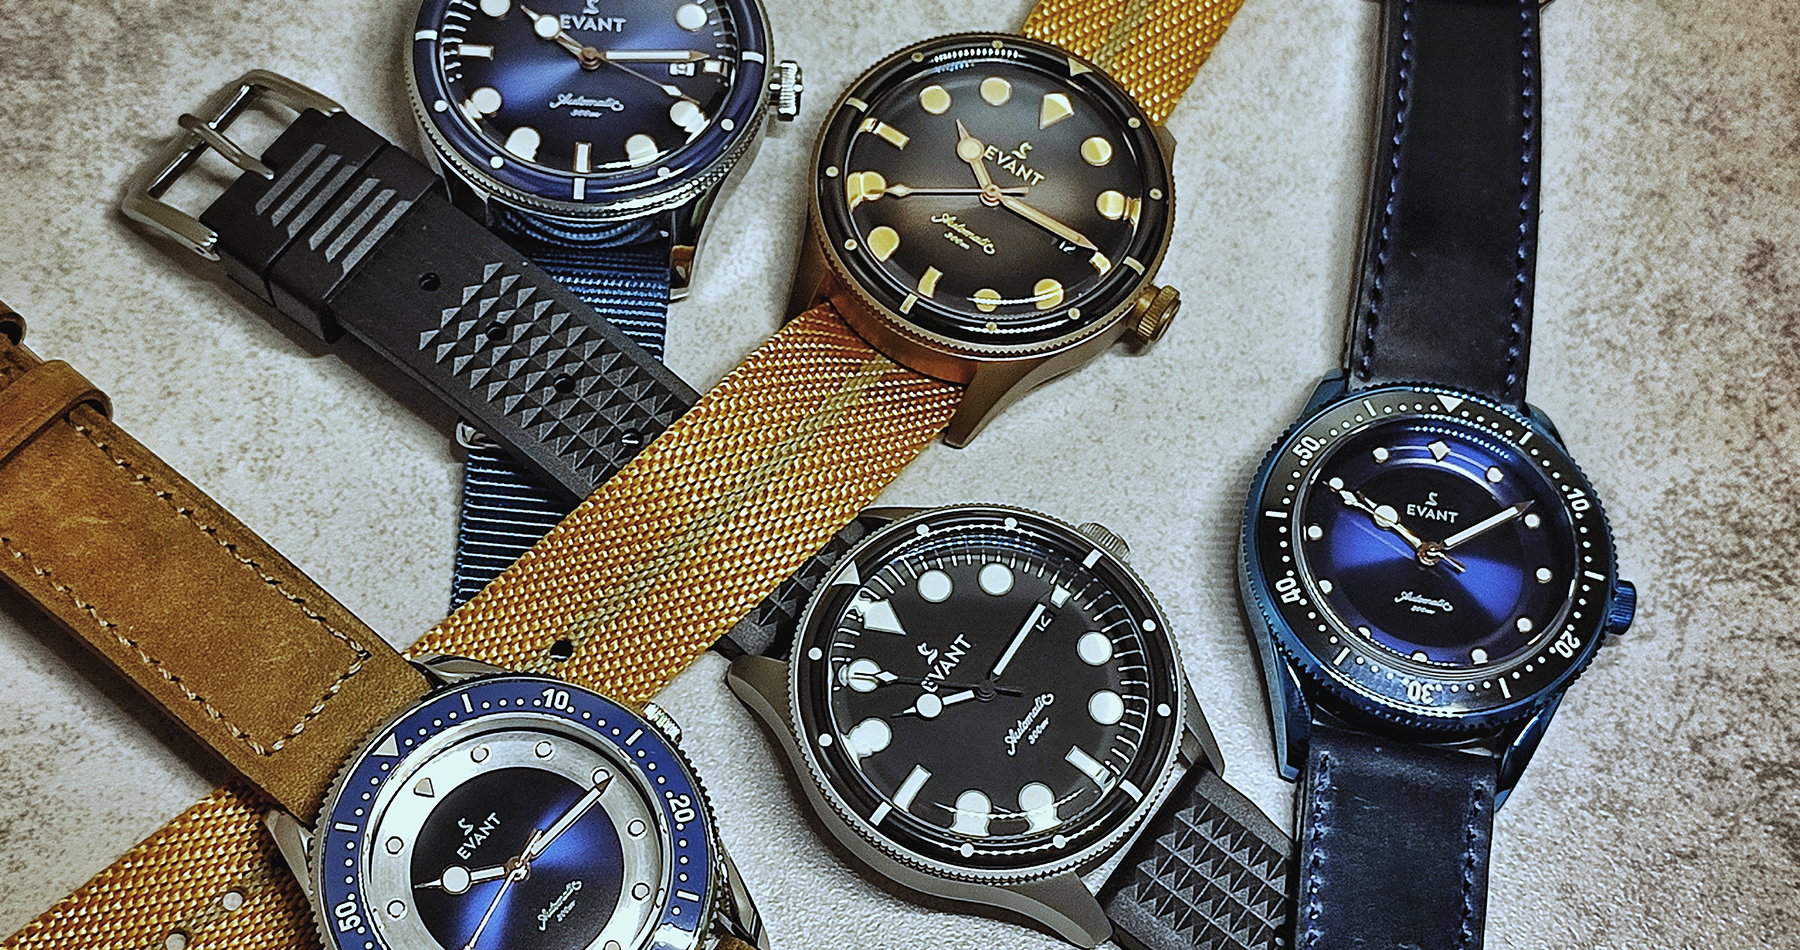 Introducing the Evant Tropic Diver 300 - Worn & Wound